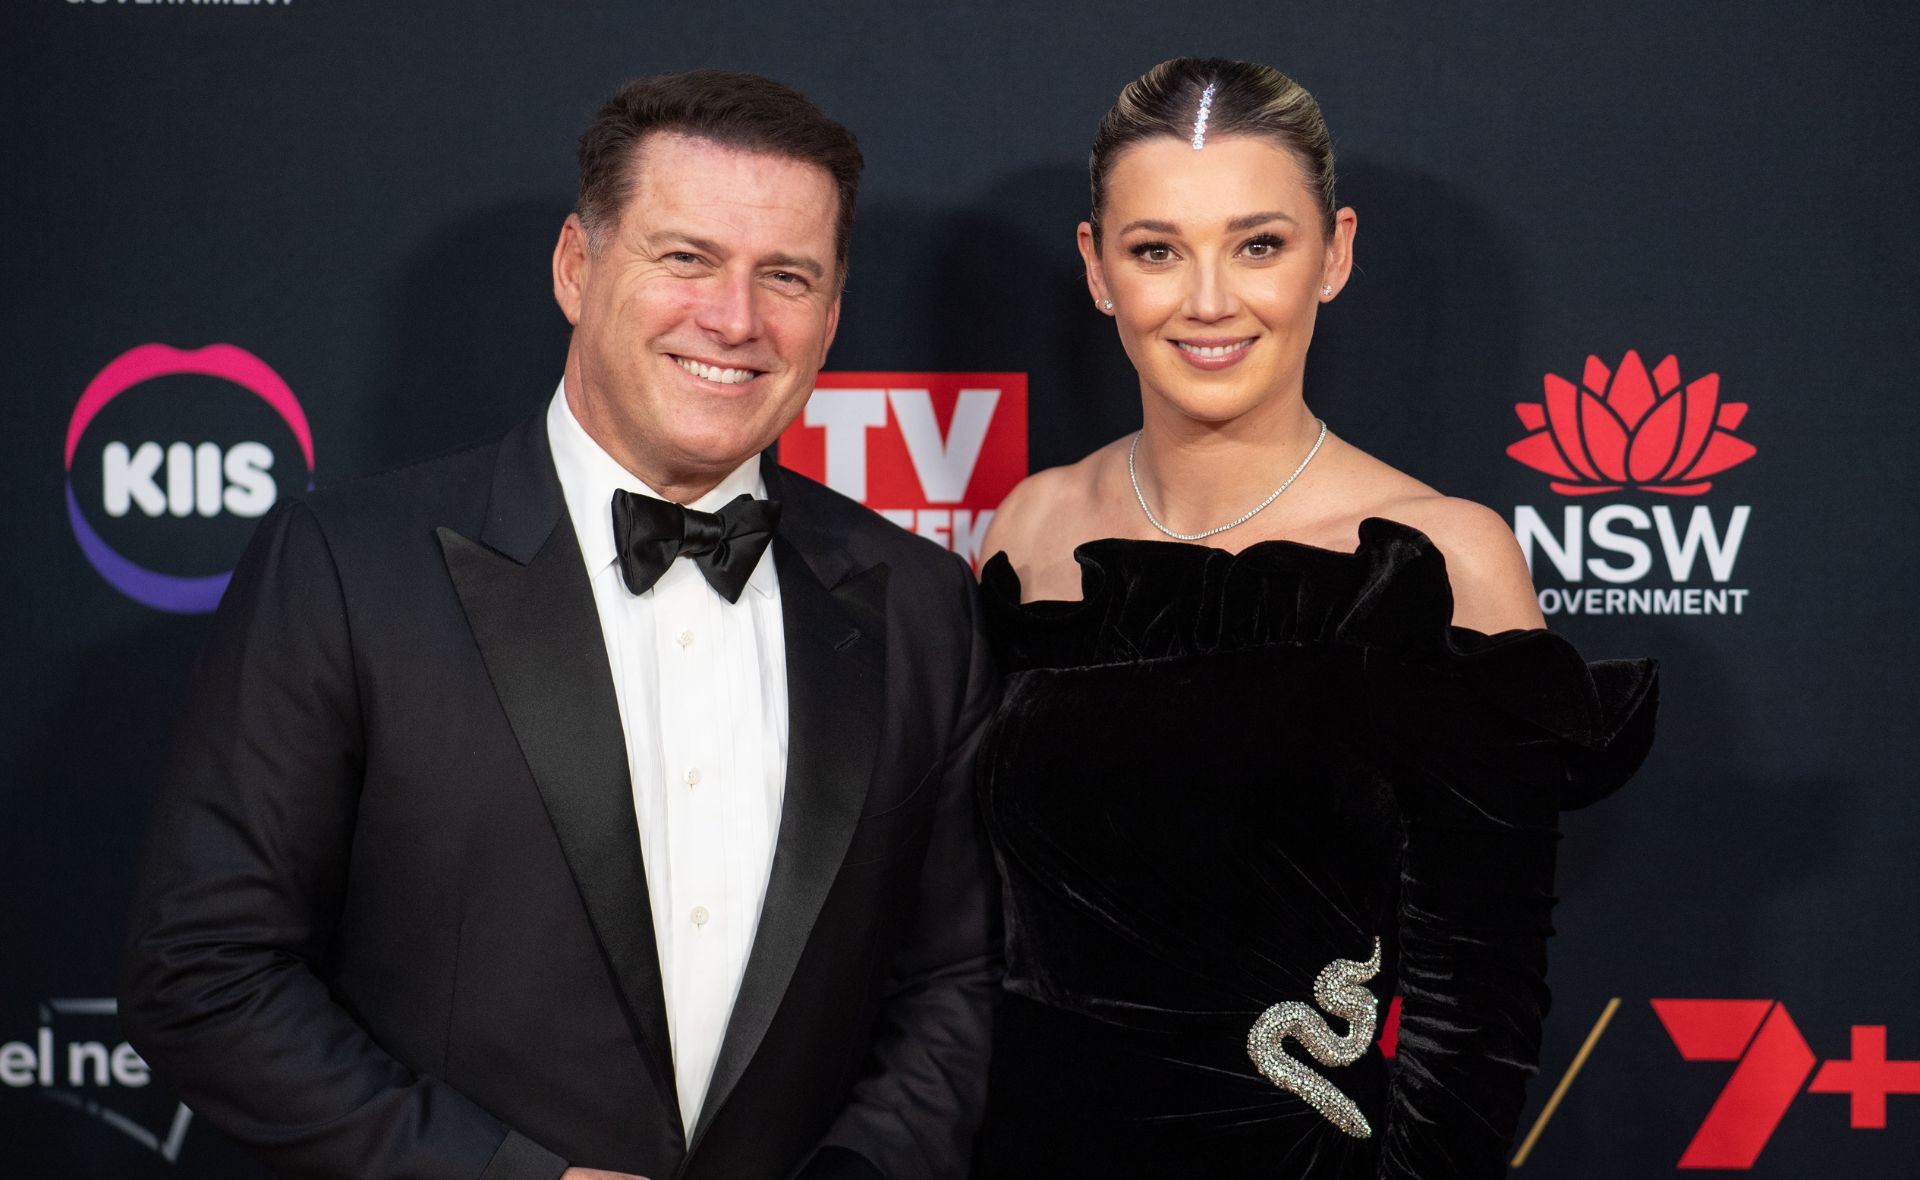 Karl Stefanovic takes to court over dream home